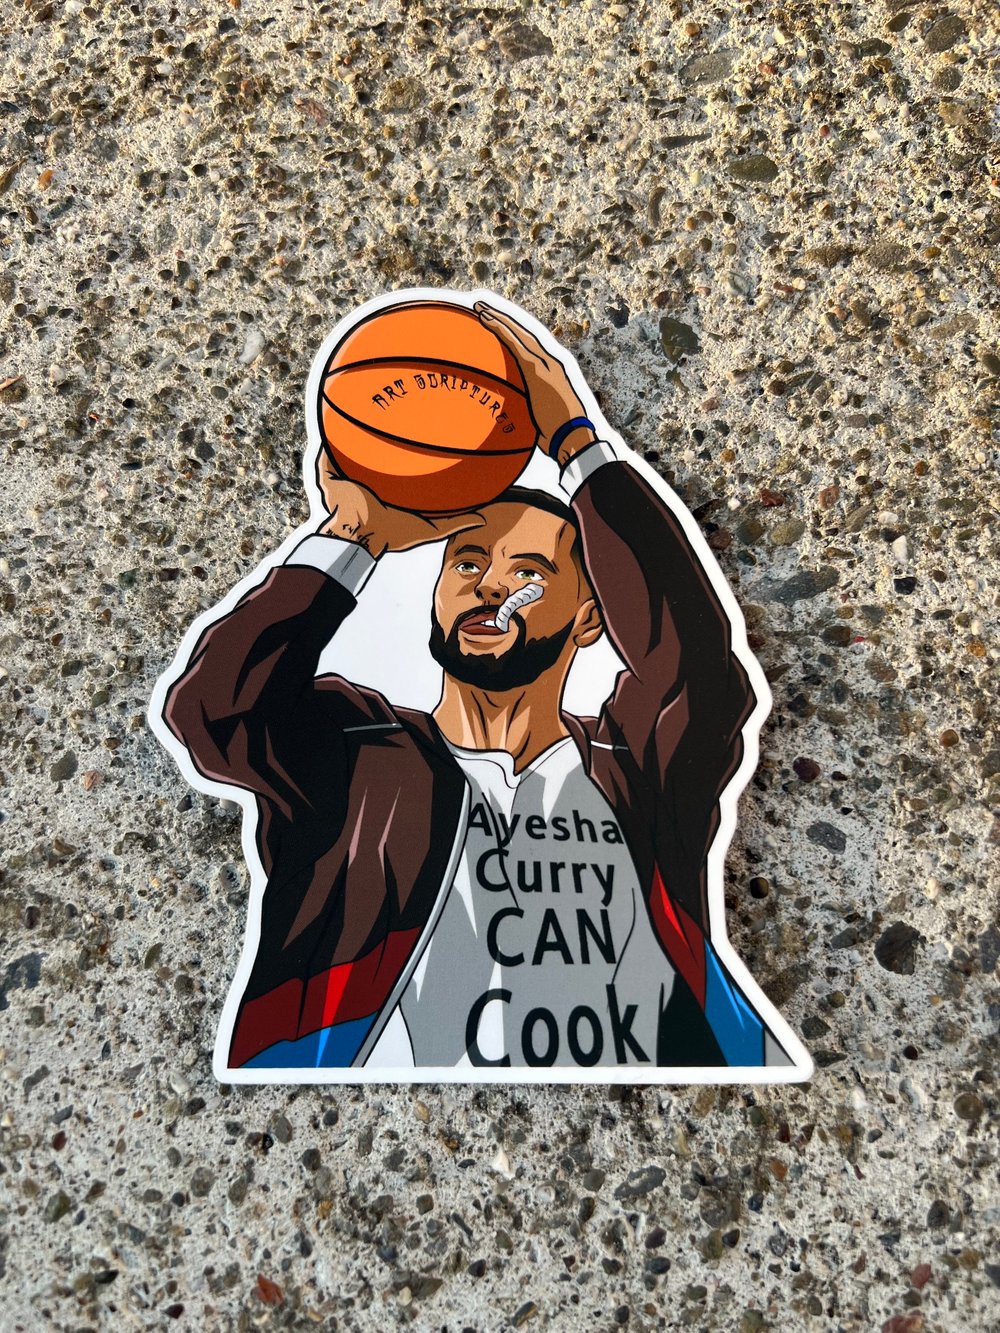 Steph “Ayesha can cook” 